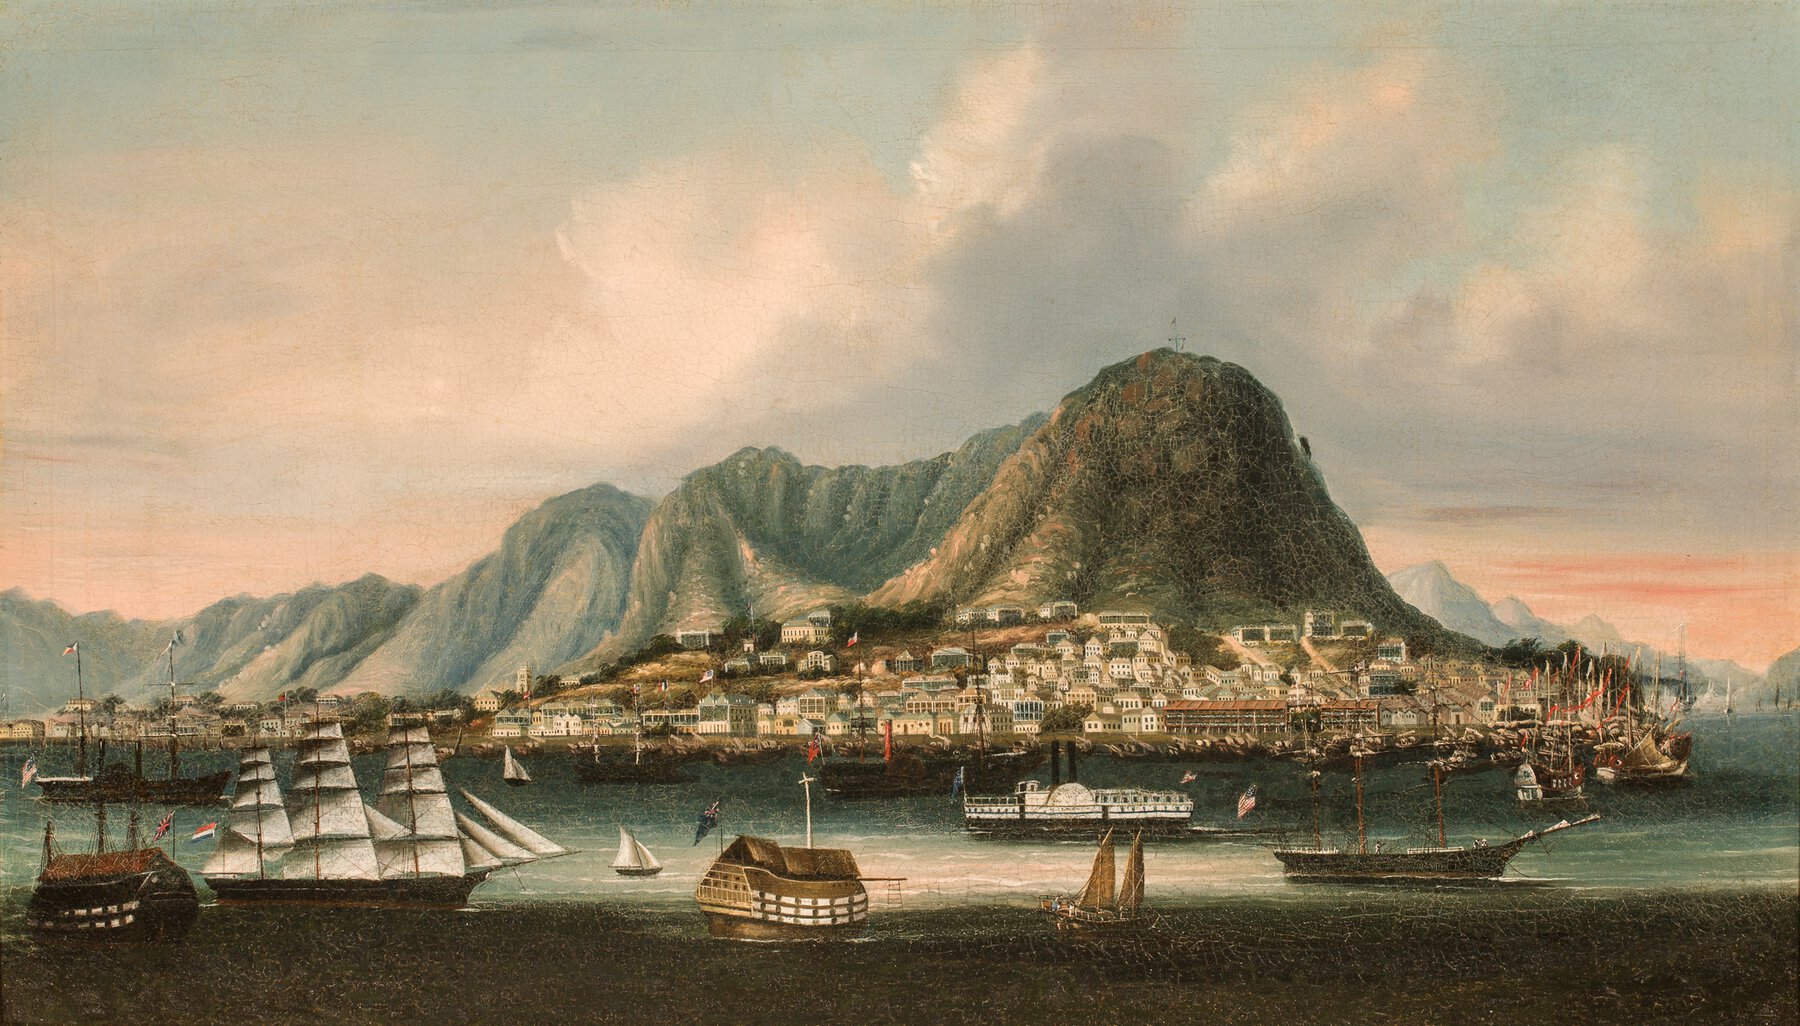 Harbour with steam and sailing ships in foreground, warehouses in background, mountains in distance.